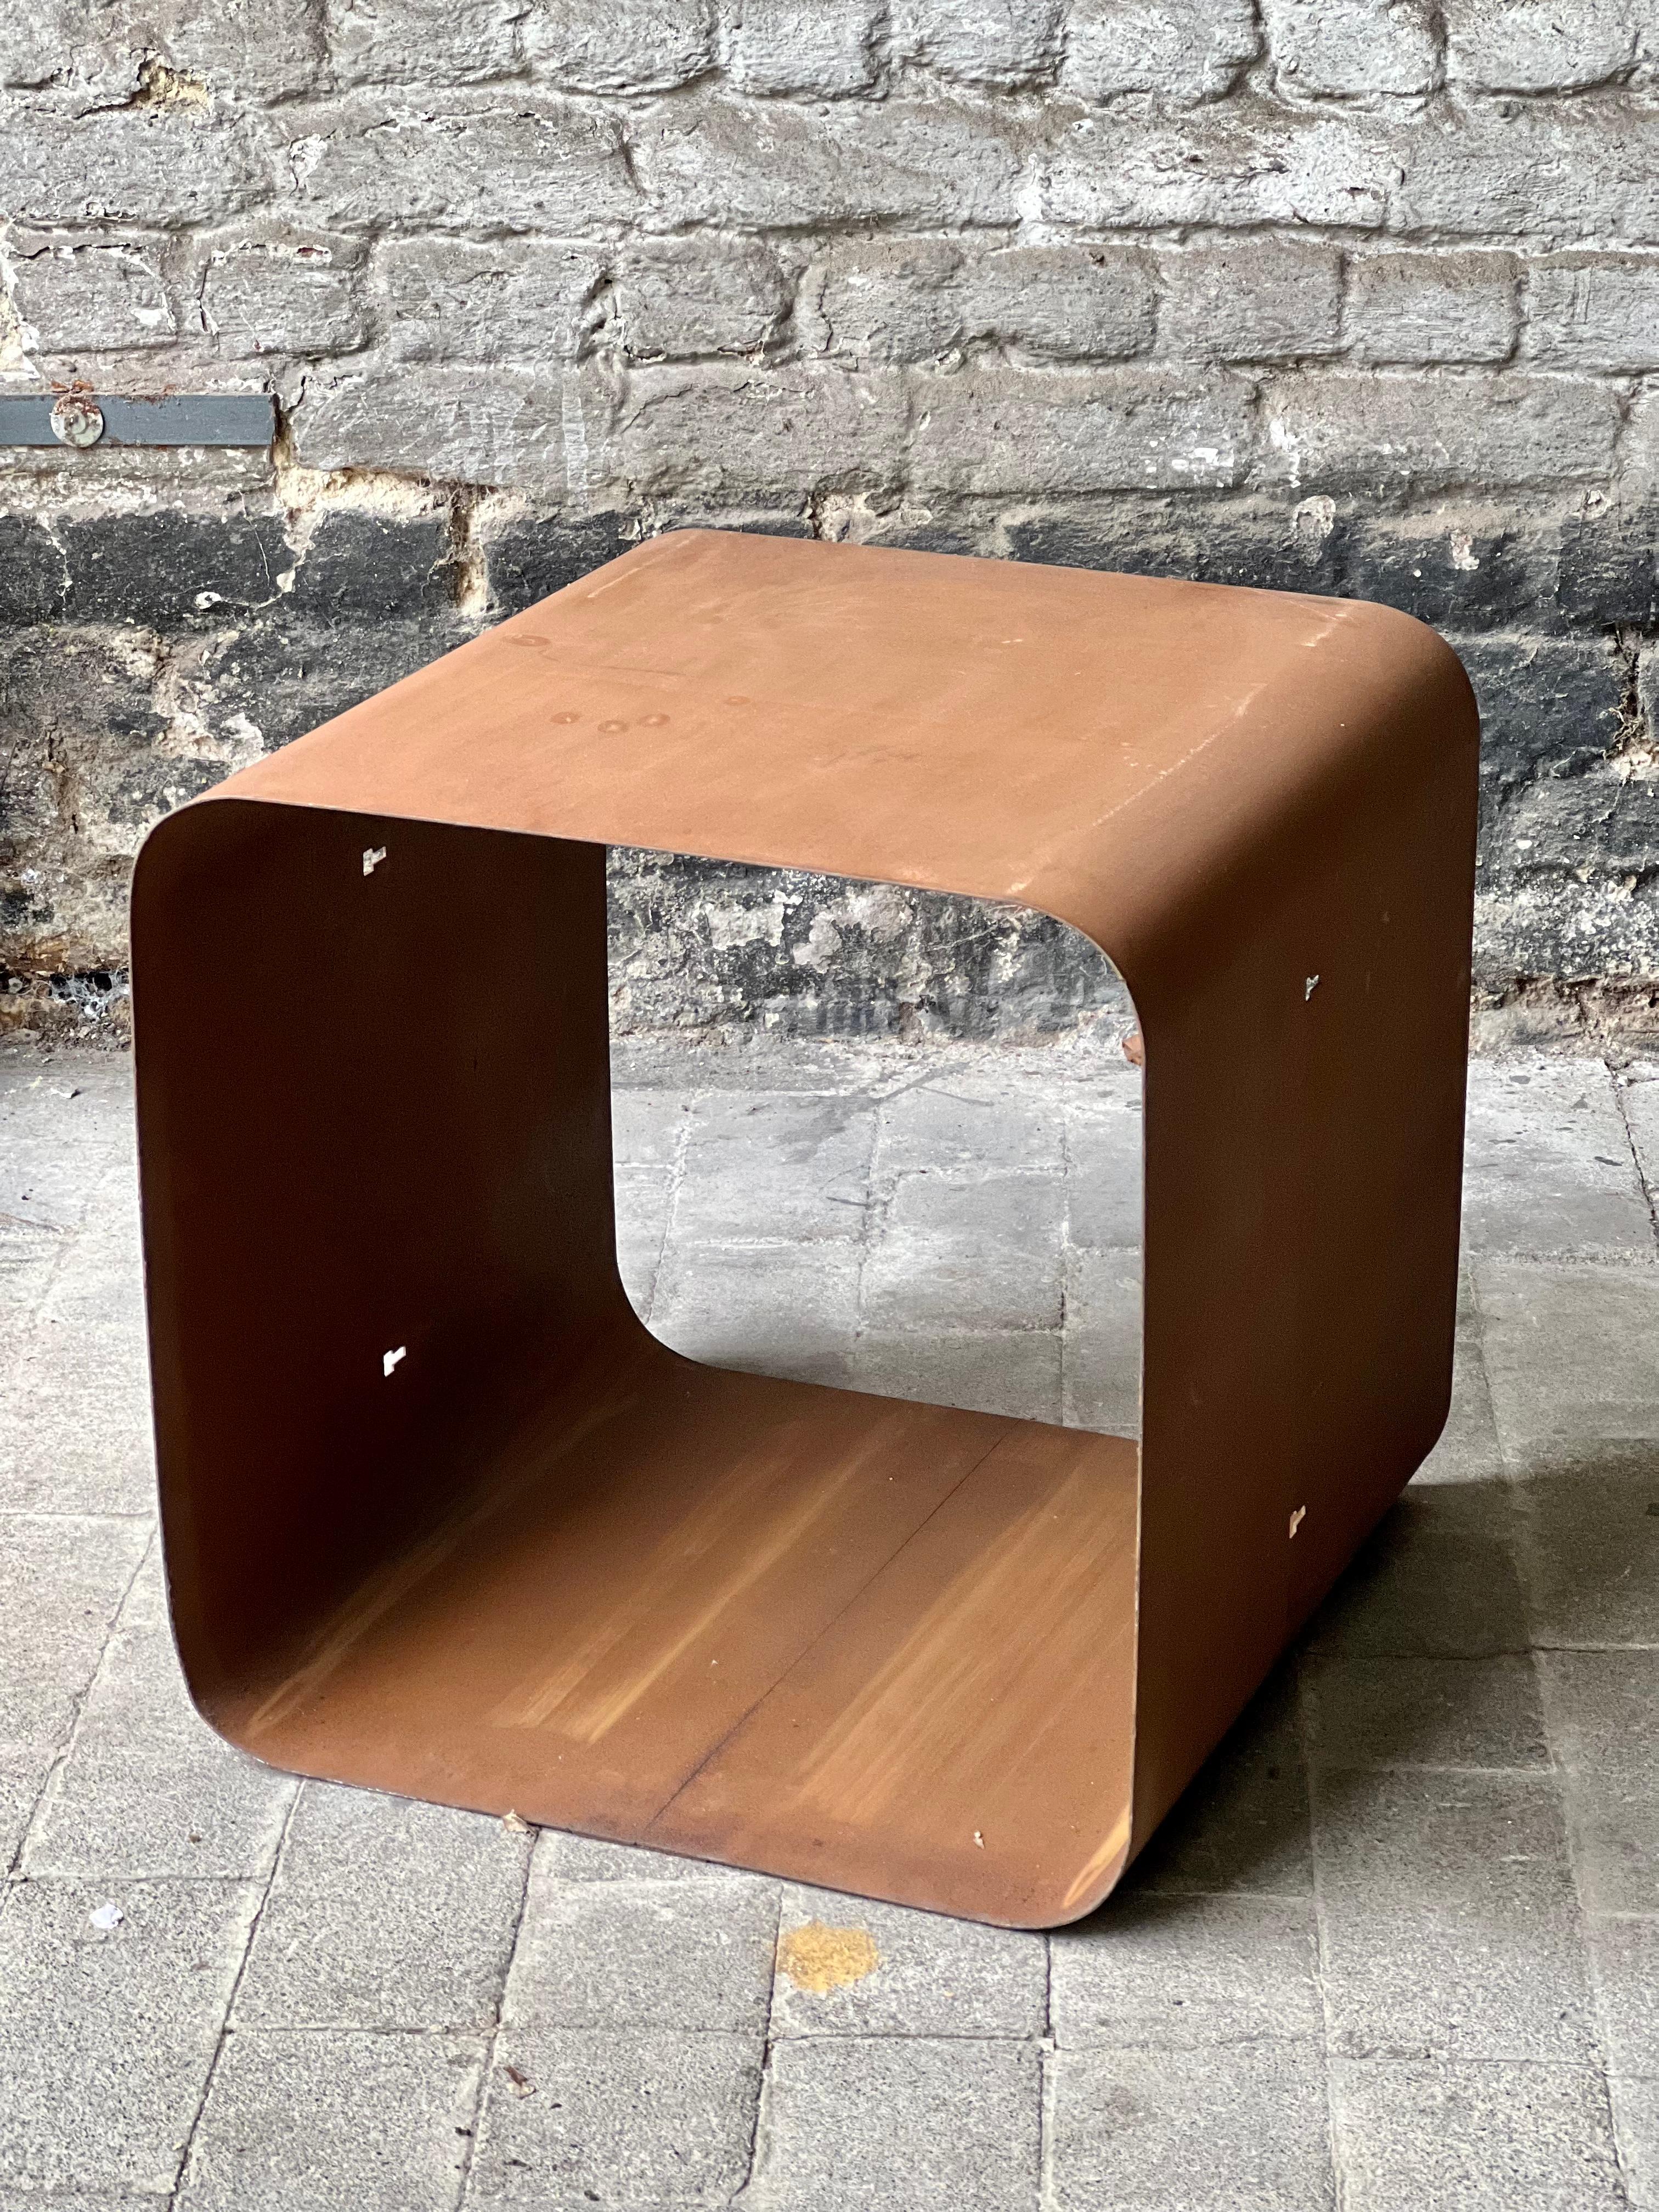 Corten steel side table or shelf. 
Geometric suspended ceiling in corten steel carefully dismantled in the CCN Building by Groupe Structures (ca. 1974) in Gare du Nord, Brussels.  Originally used as suspended ceiling, the modules seem to be perfect